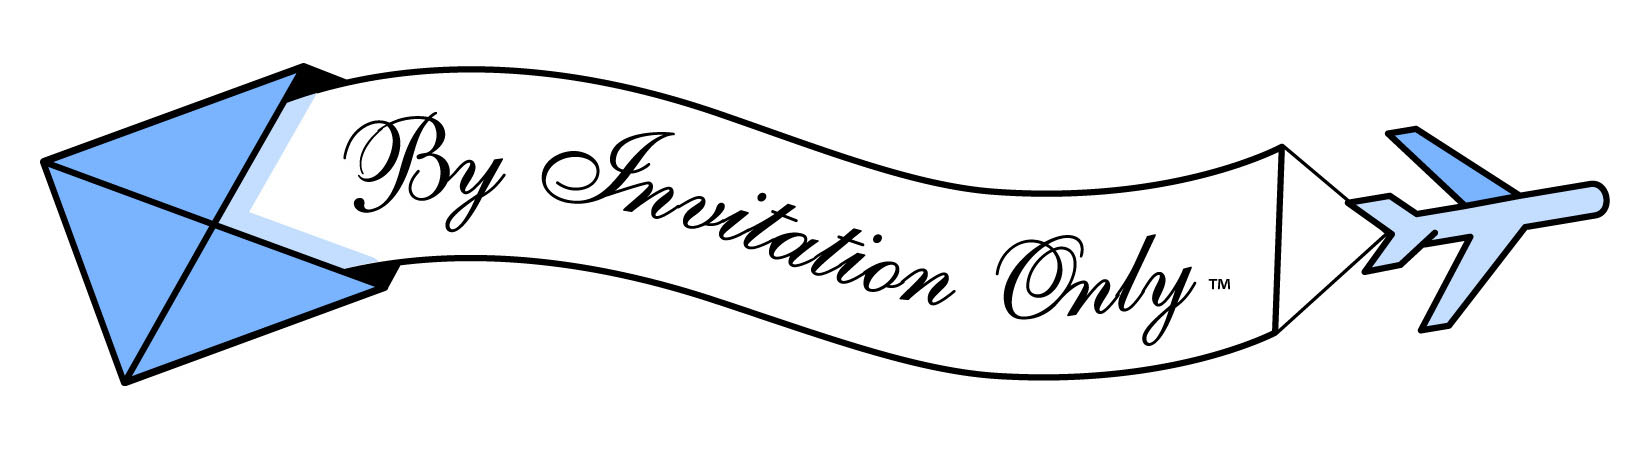 By Invitation Only logo